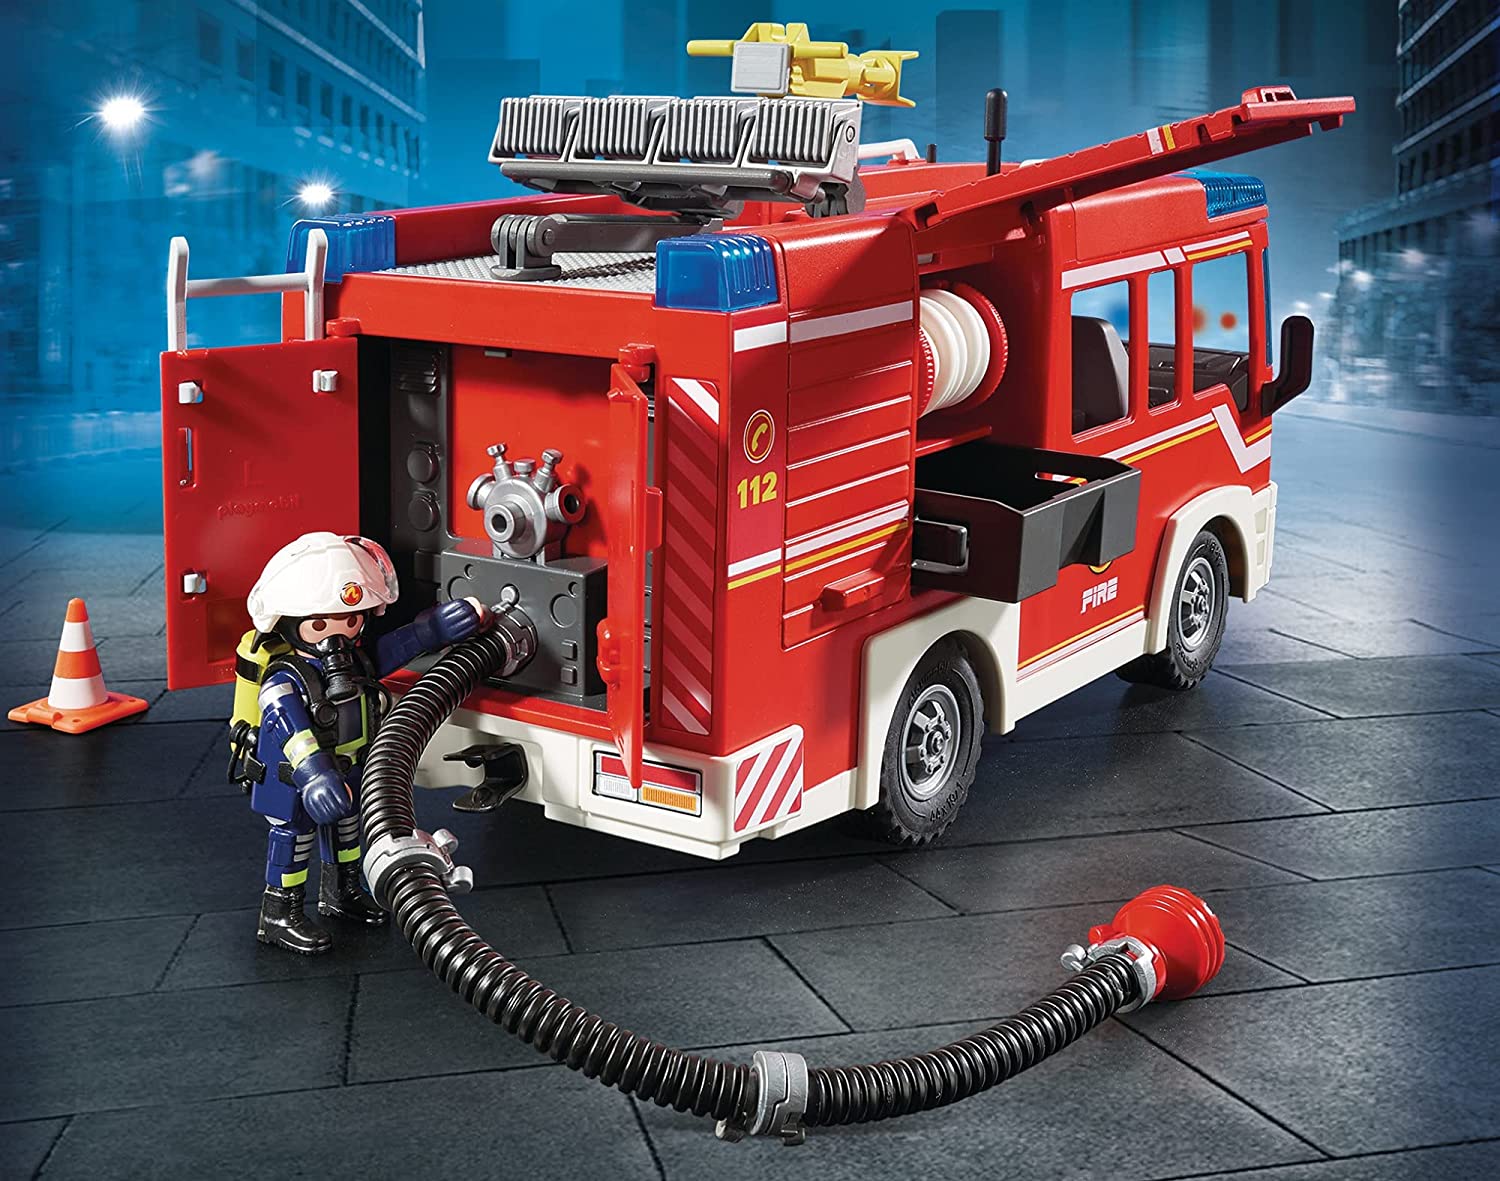 City Action Fire Emergency Rescue Action